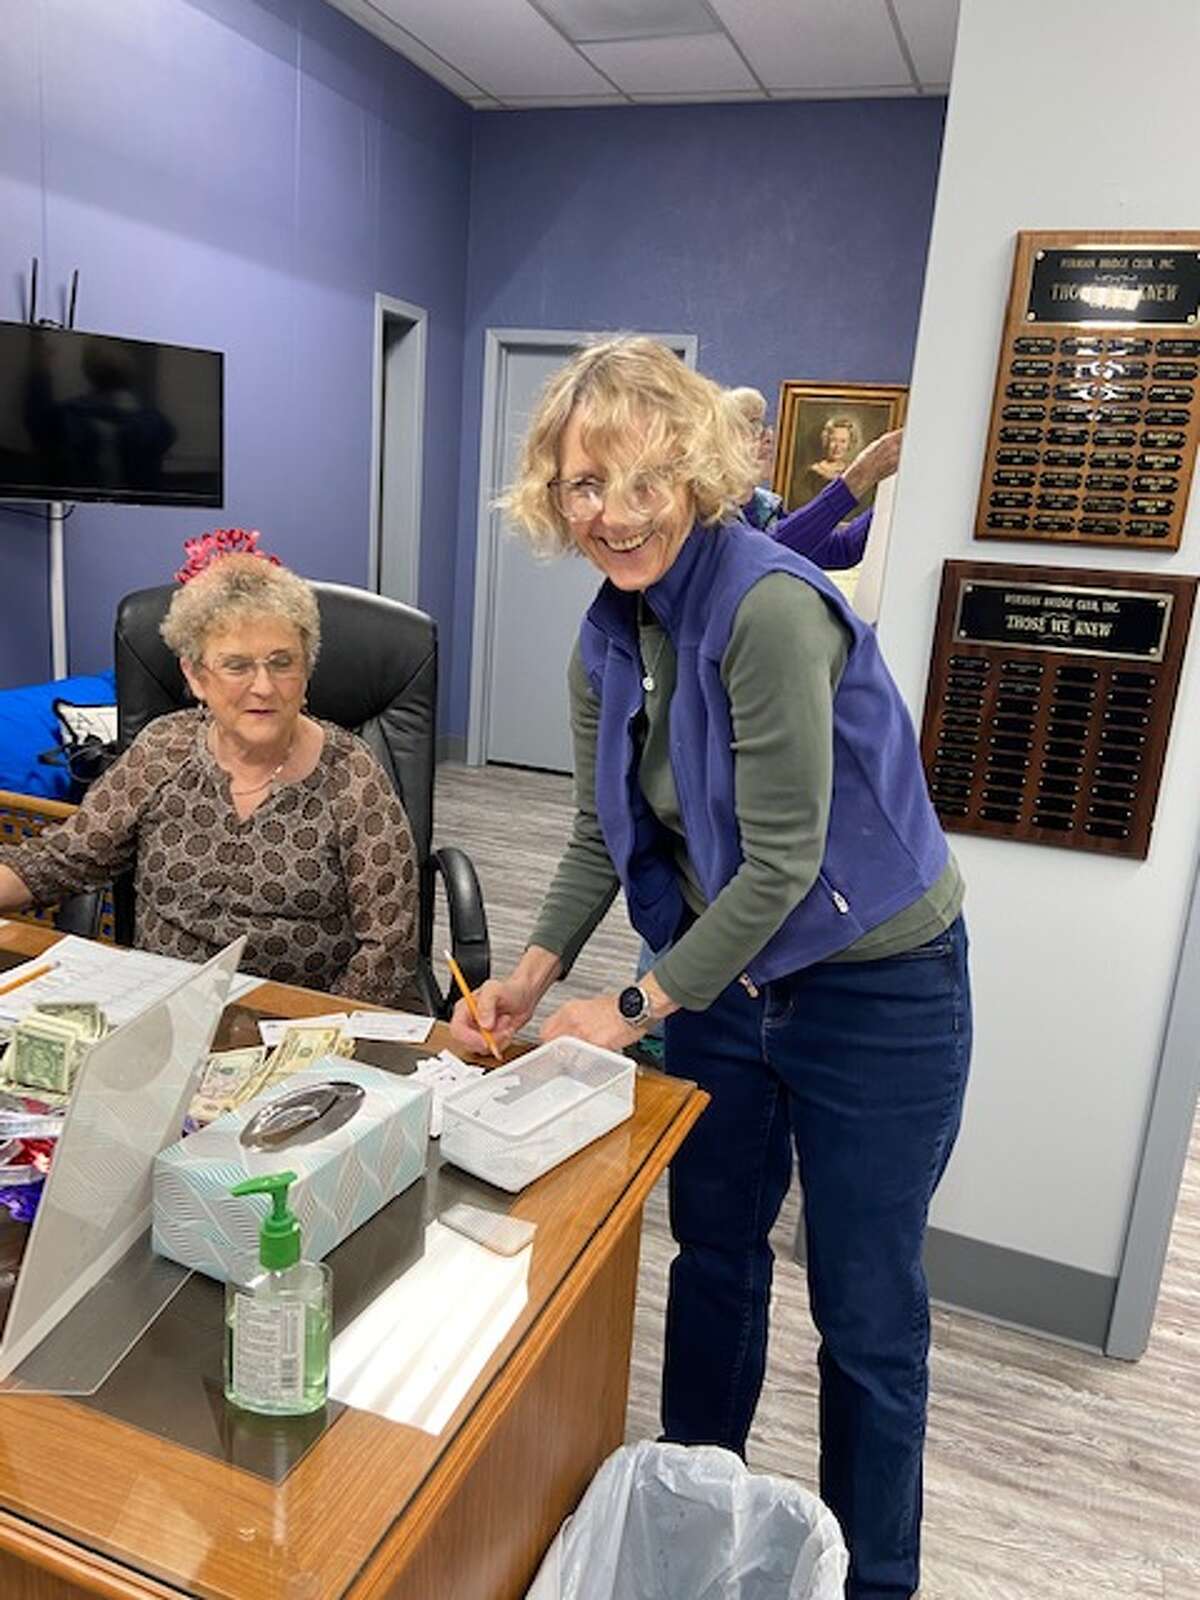 Img 1503: Nancy Ward, left, reminds Kay Sewell to sign up for a free game at the Allison Bridge Club's New Years buffet and game.